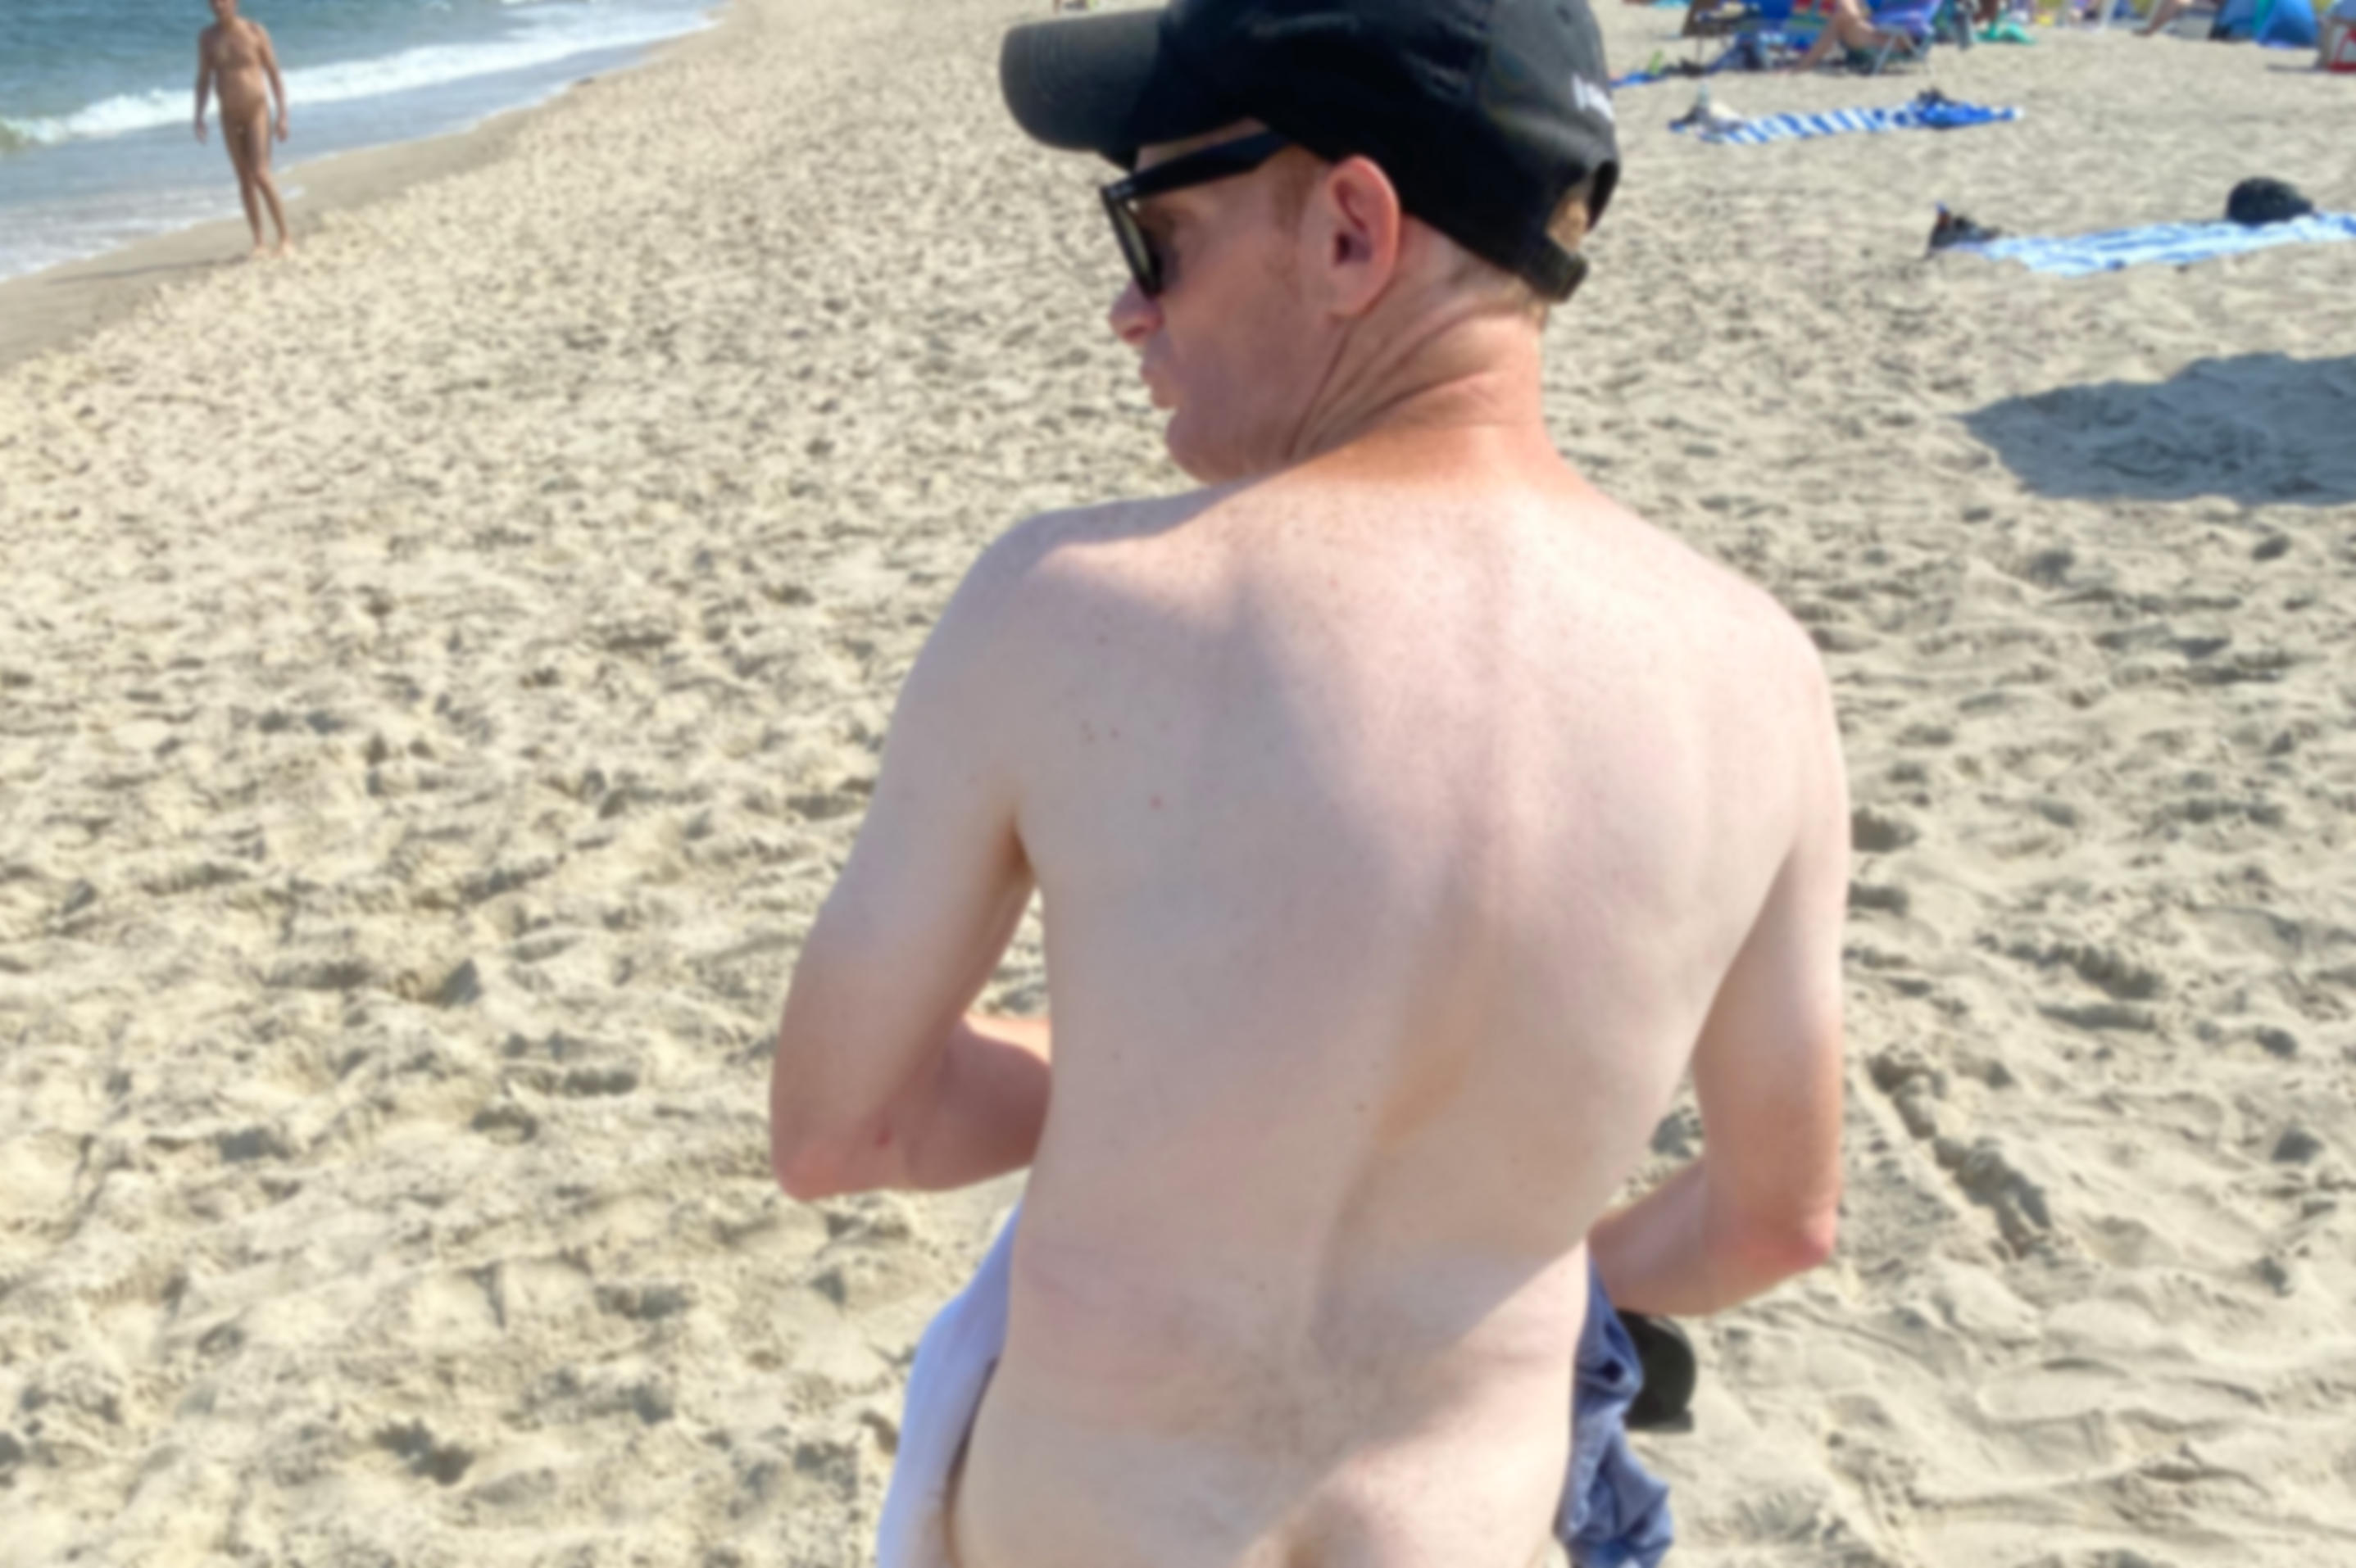 Medicated Pete Fulfills His Dream of Visiting a Nude Beach Howard Stern photo